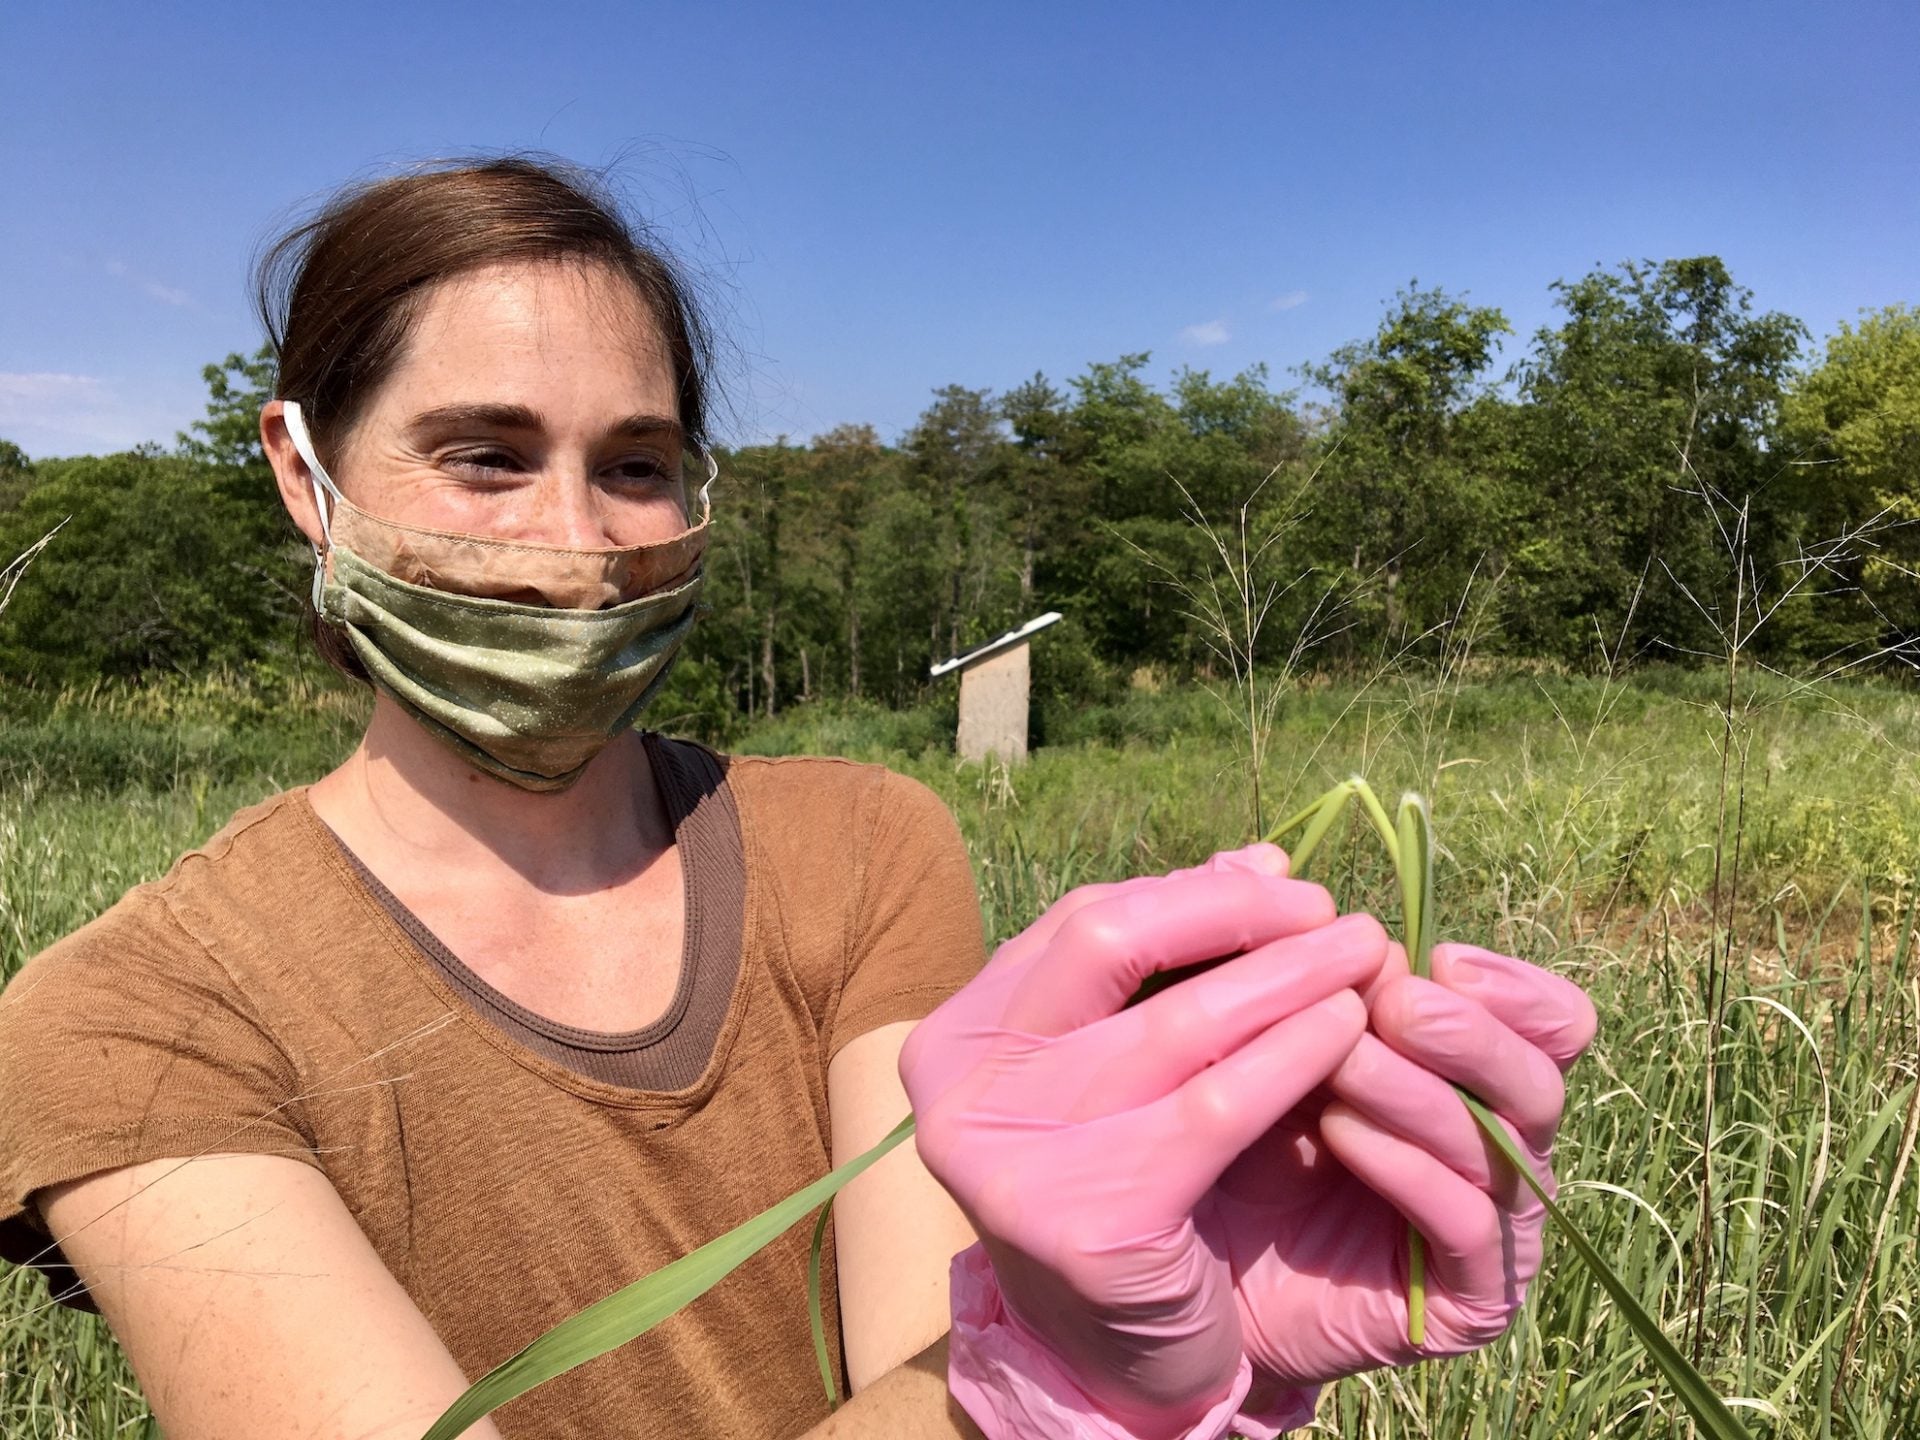 Some faculty’s environmental science research on hold, while others find work around, in face of COVID-19 - WHYY